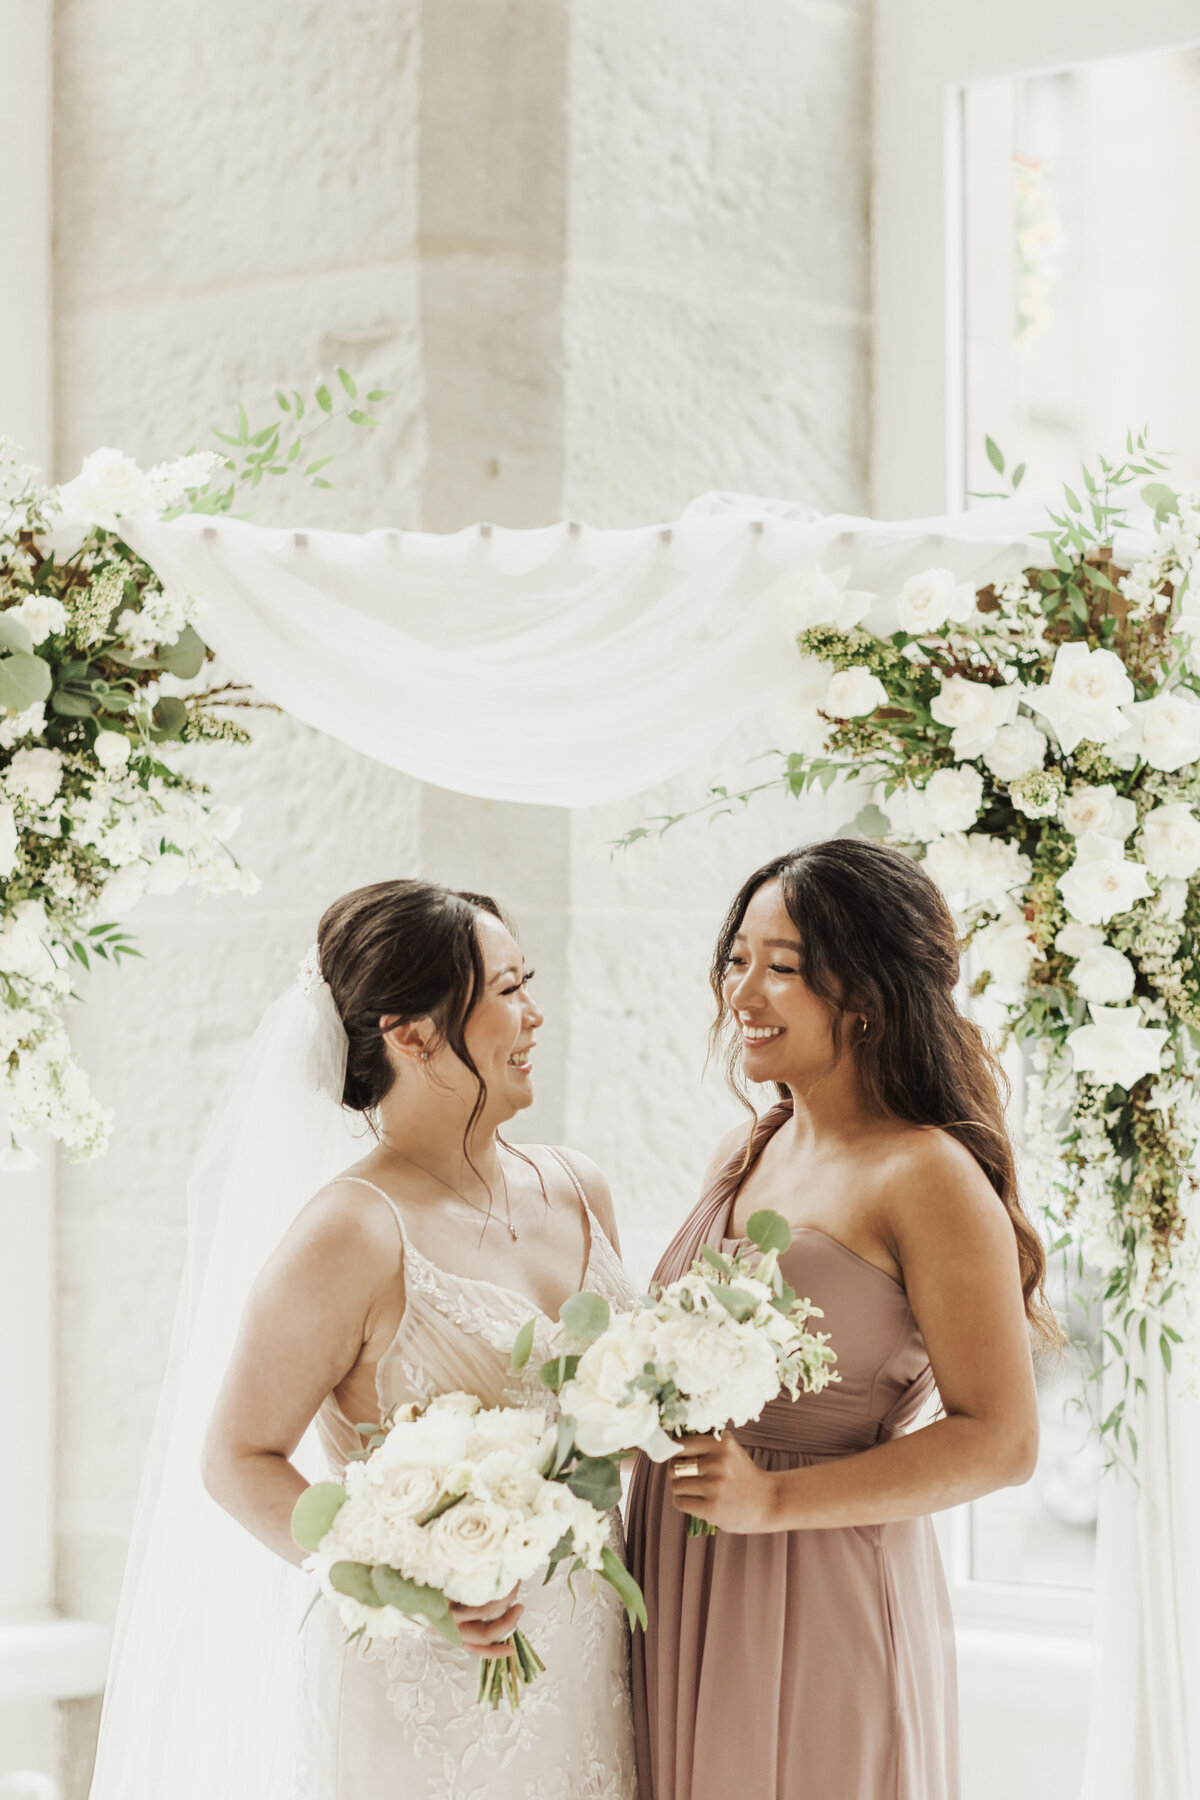 Light-Filled Wedding at The 101 - 7